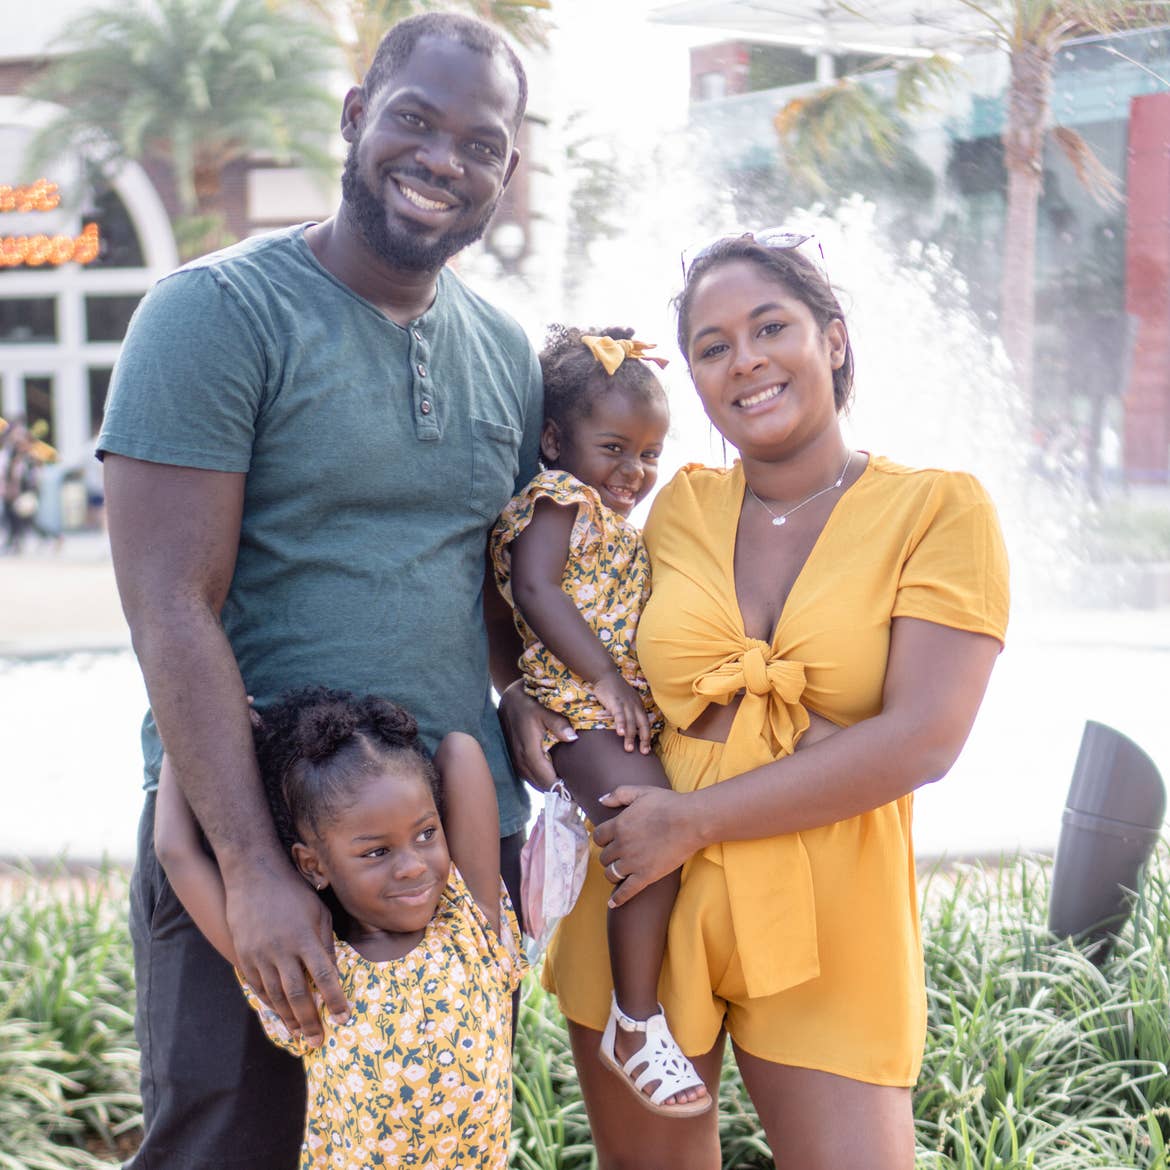 Author, Kimberly Gelin (top-right), poses with her family in front of a water fountain at Disney Springs in Walt Disney World Resort.